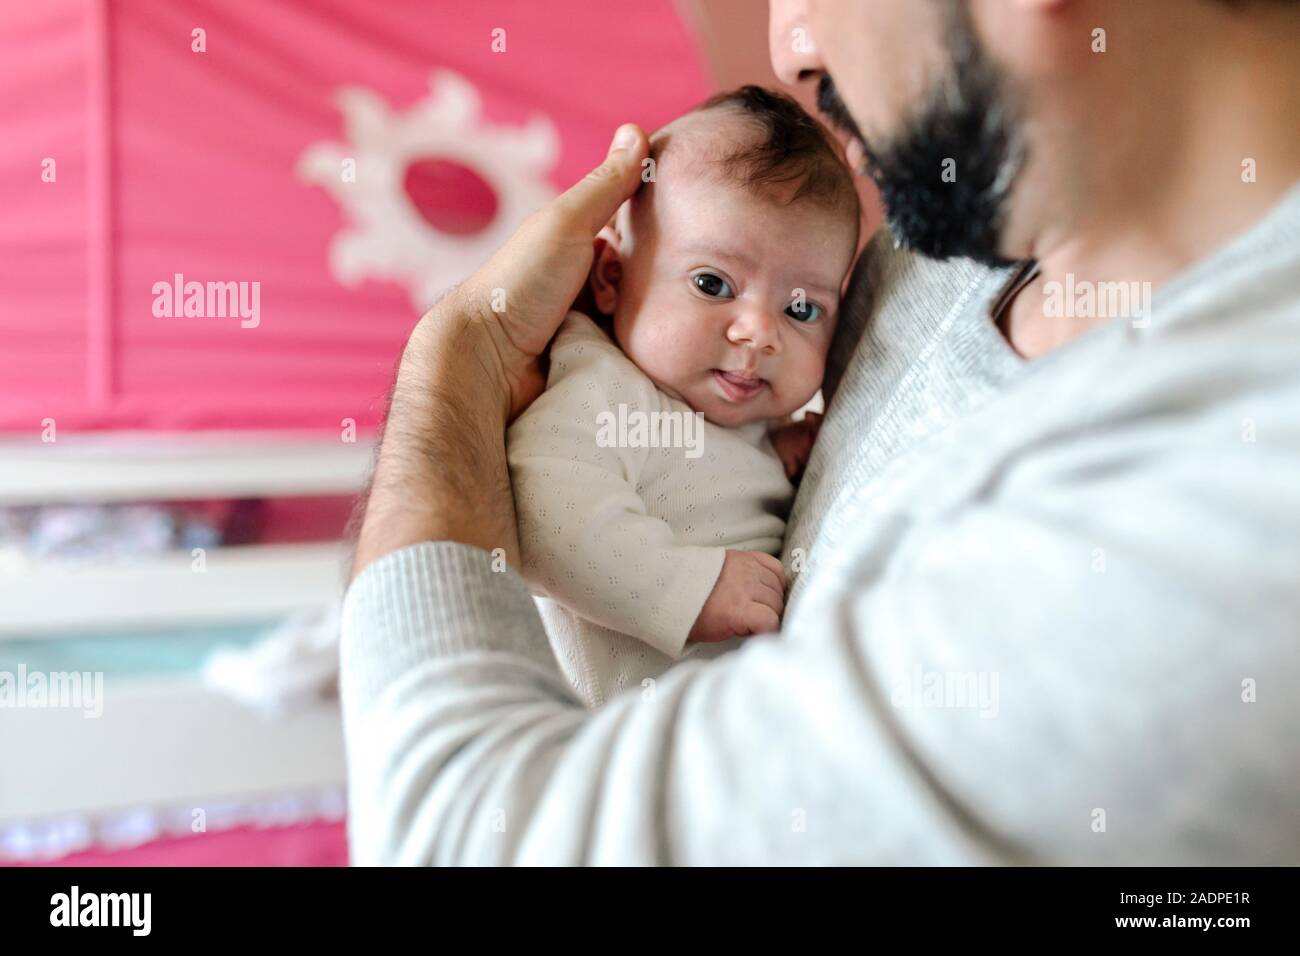 Tender father with beard cuddling infant with big brown eyes Stock Photo